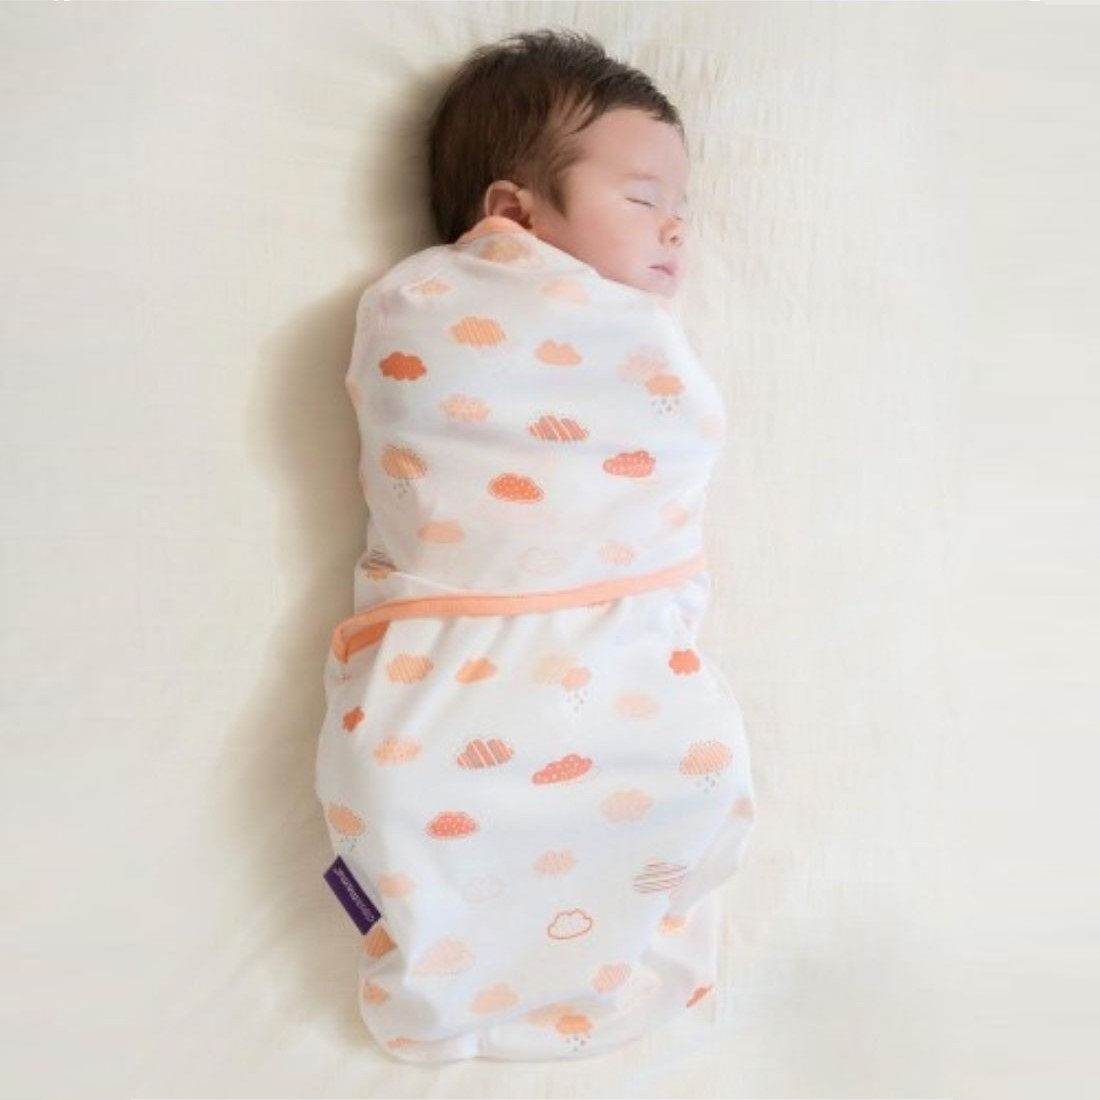 baby-fair Clevamama Swaddle to Sleep Baby Swaddle (Assorted Colors)